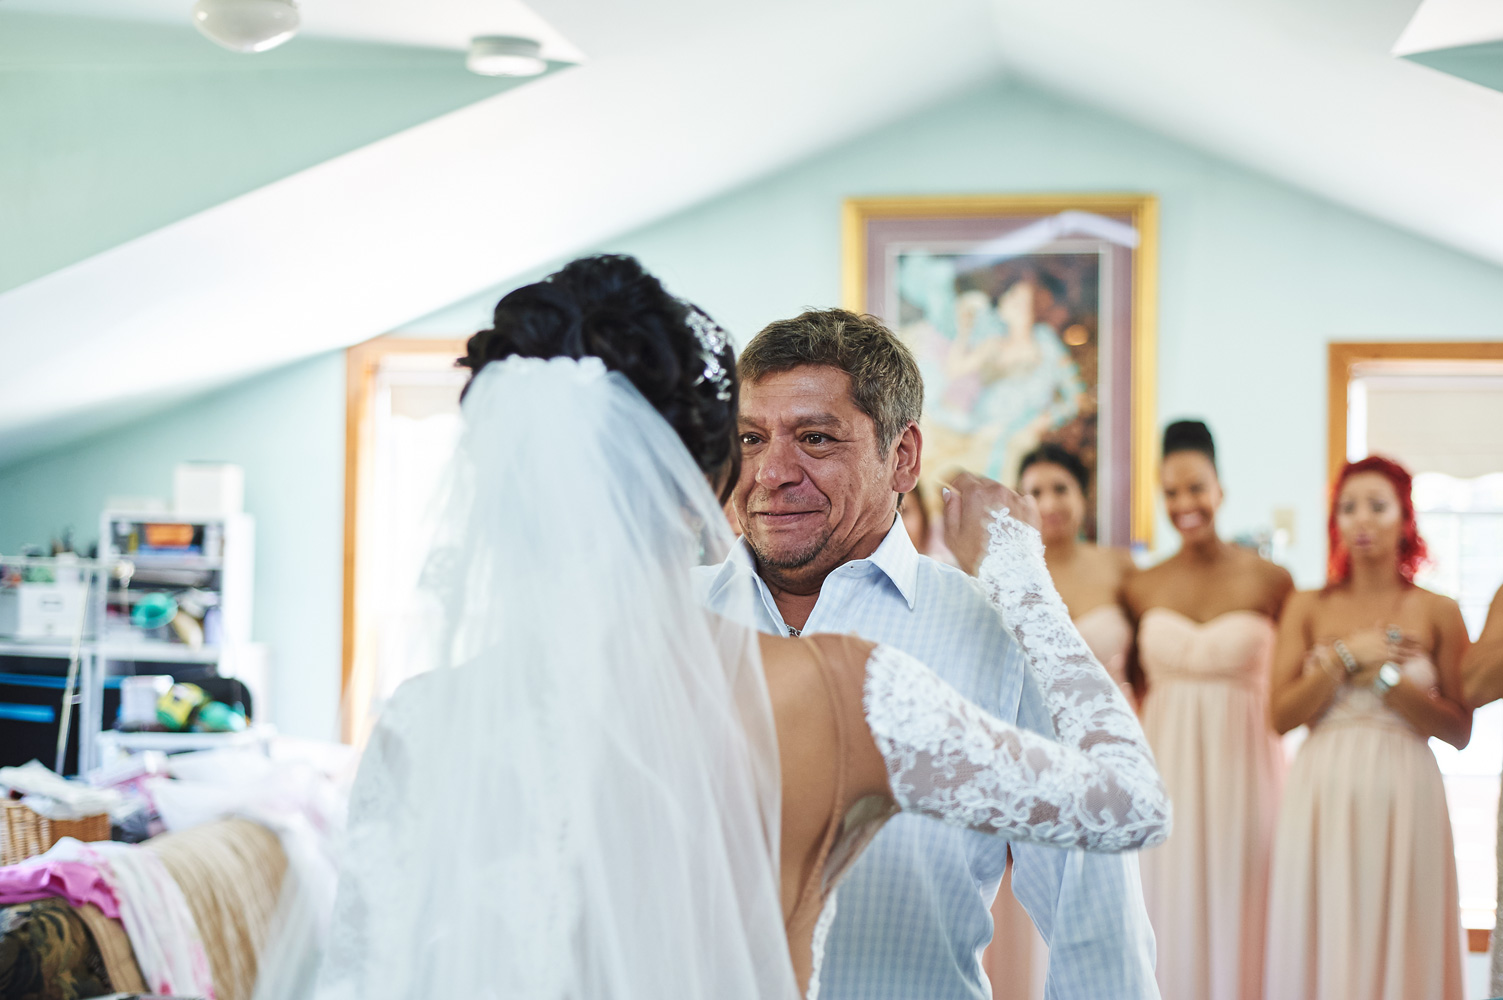 father-of-the-bride-crying-over-seeing-his-daughter-in-her-wedding-dress.jpg